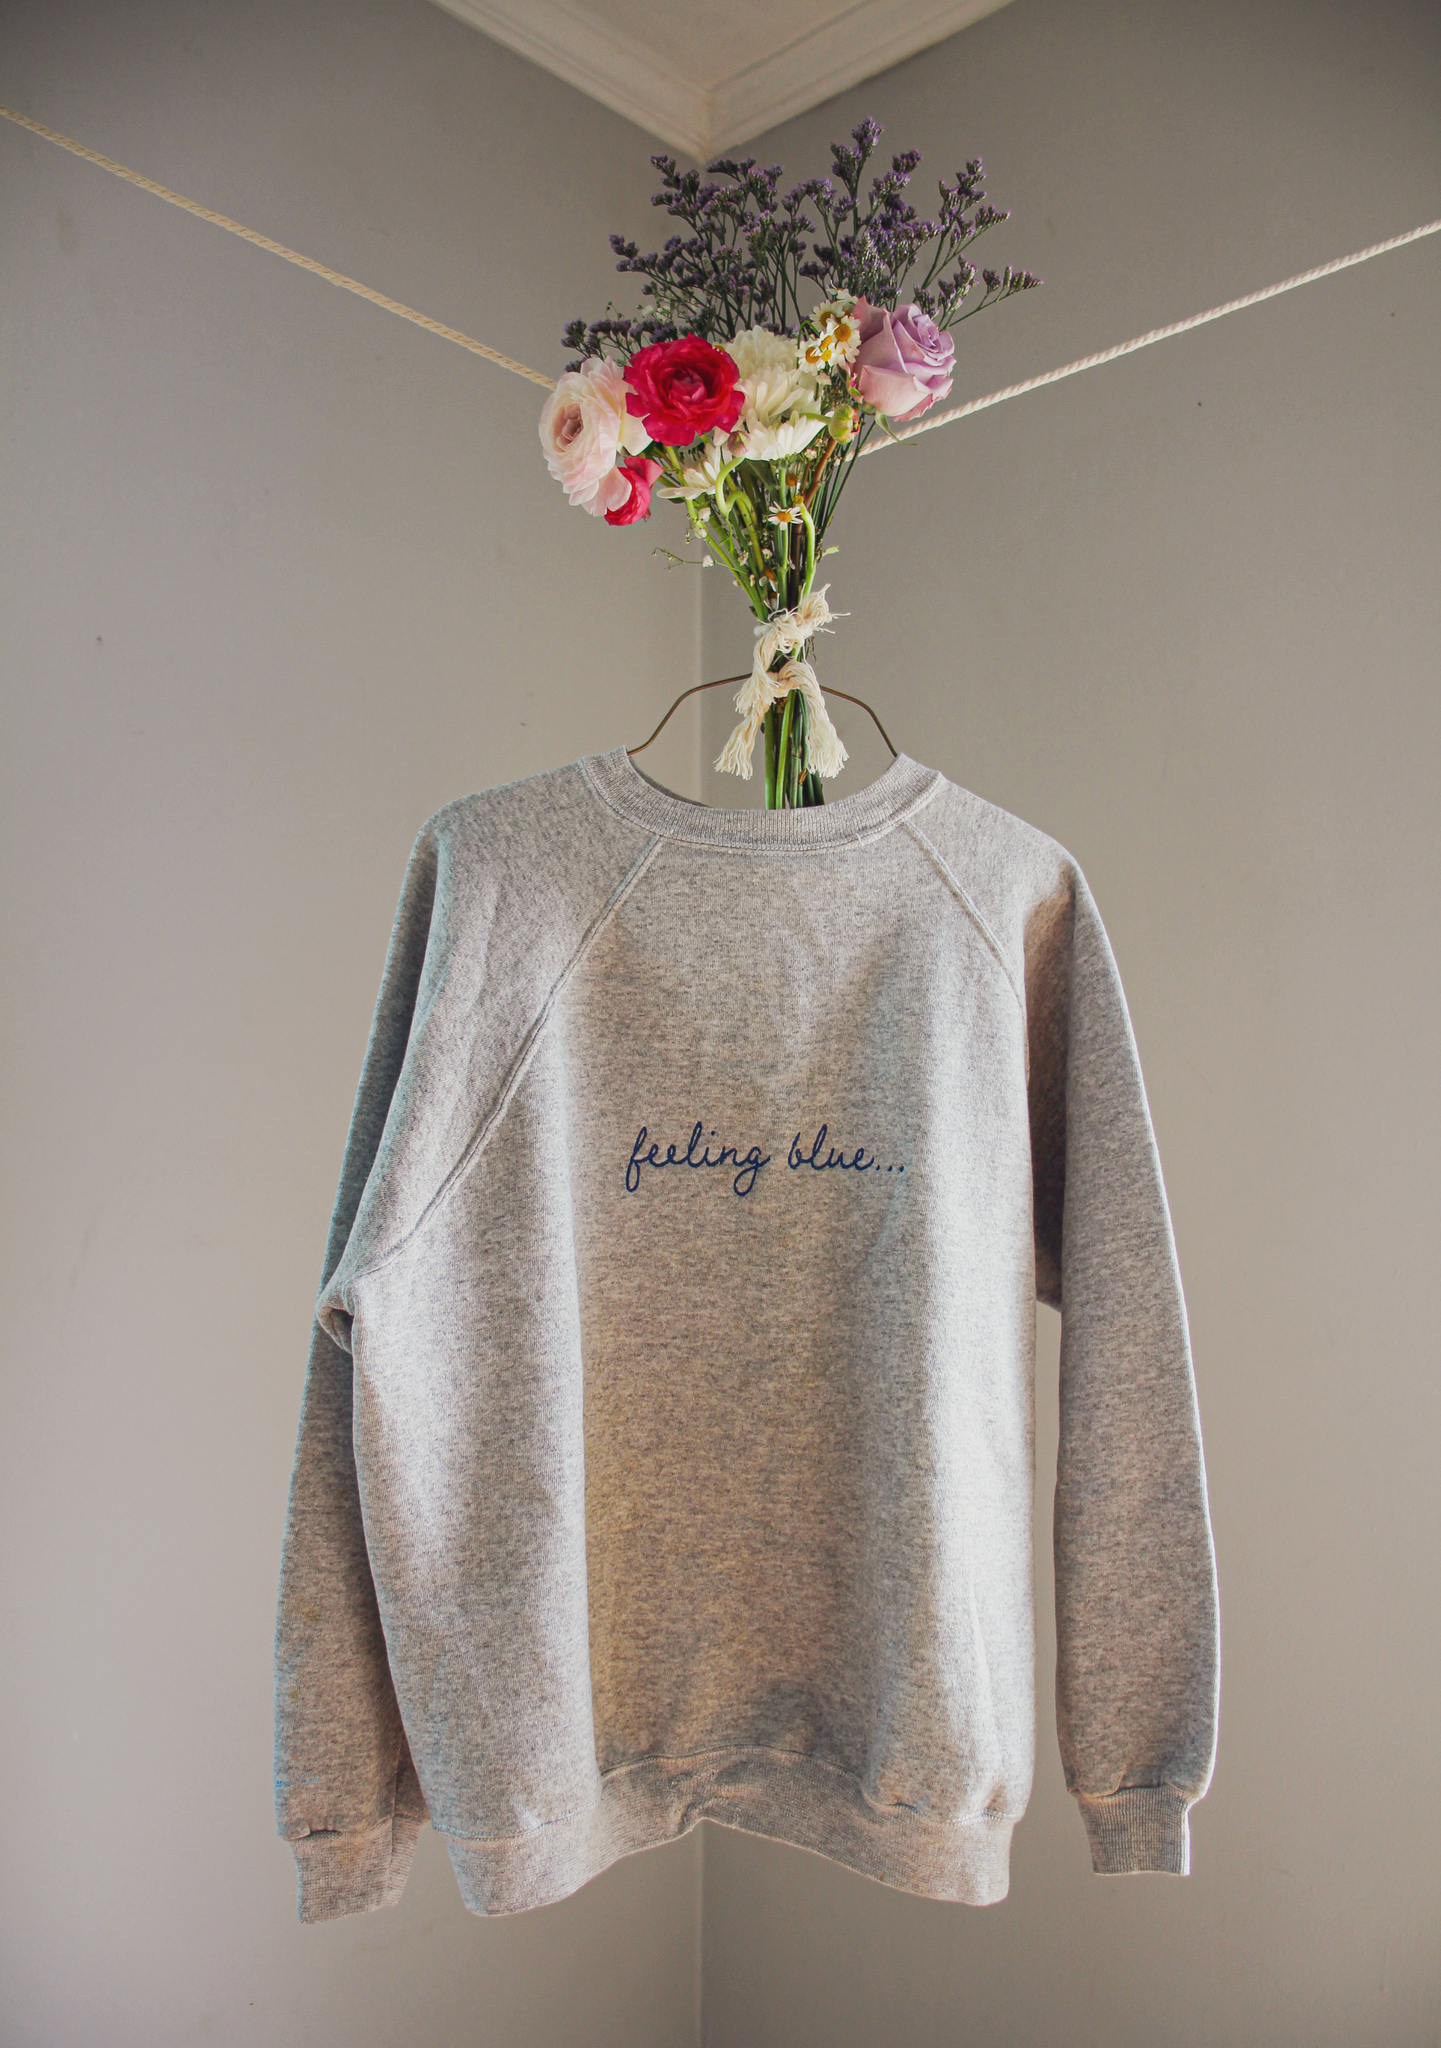 A gray sweatshirt with blue embroidered text on it that reads "feeling blue....," hanging on a wire hanger with a bouquet of flowers tied to it